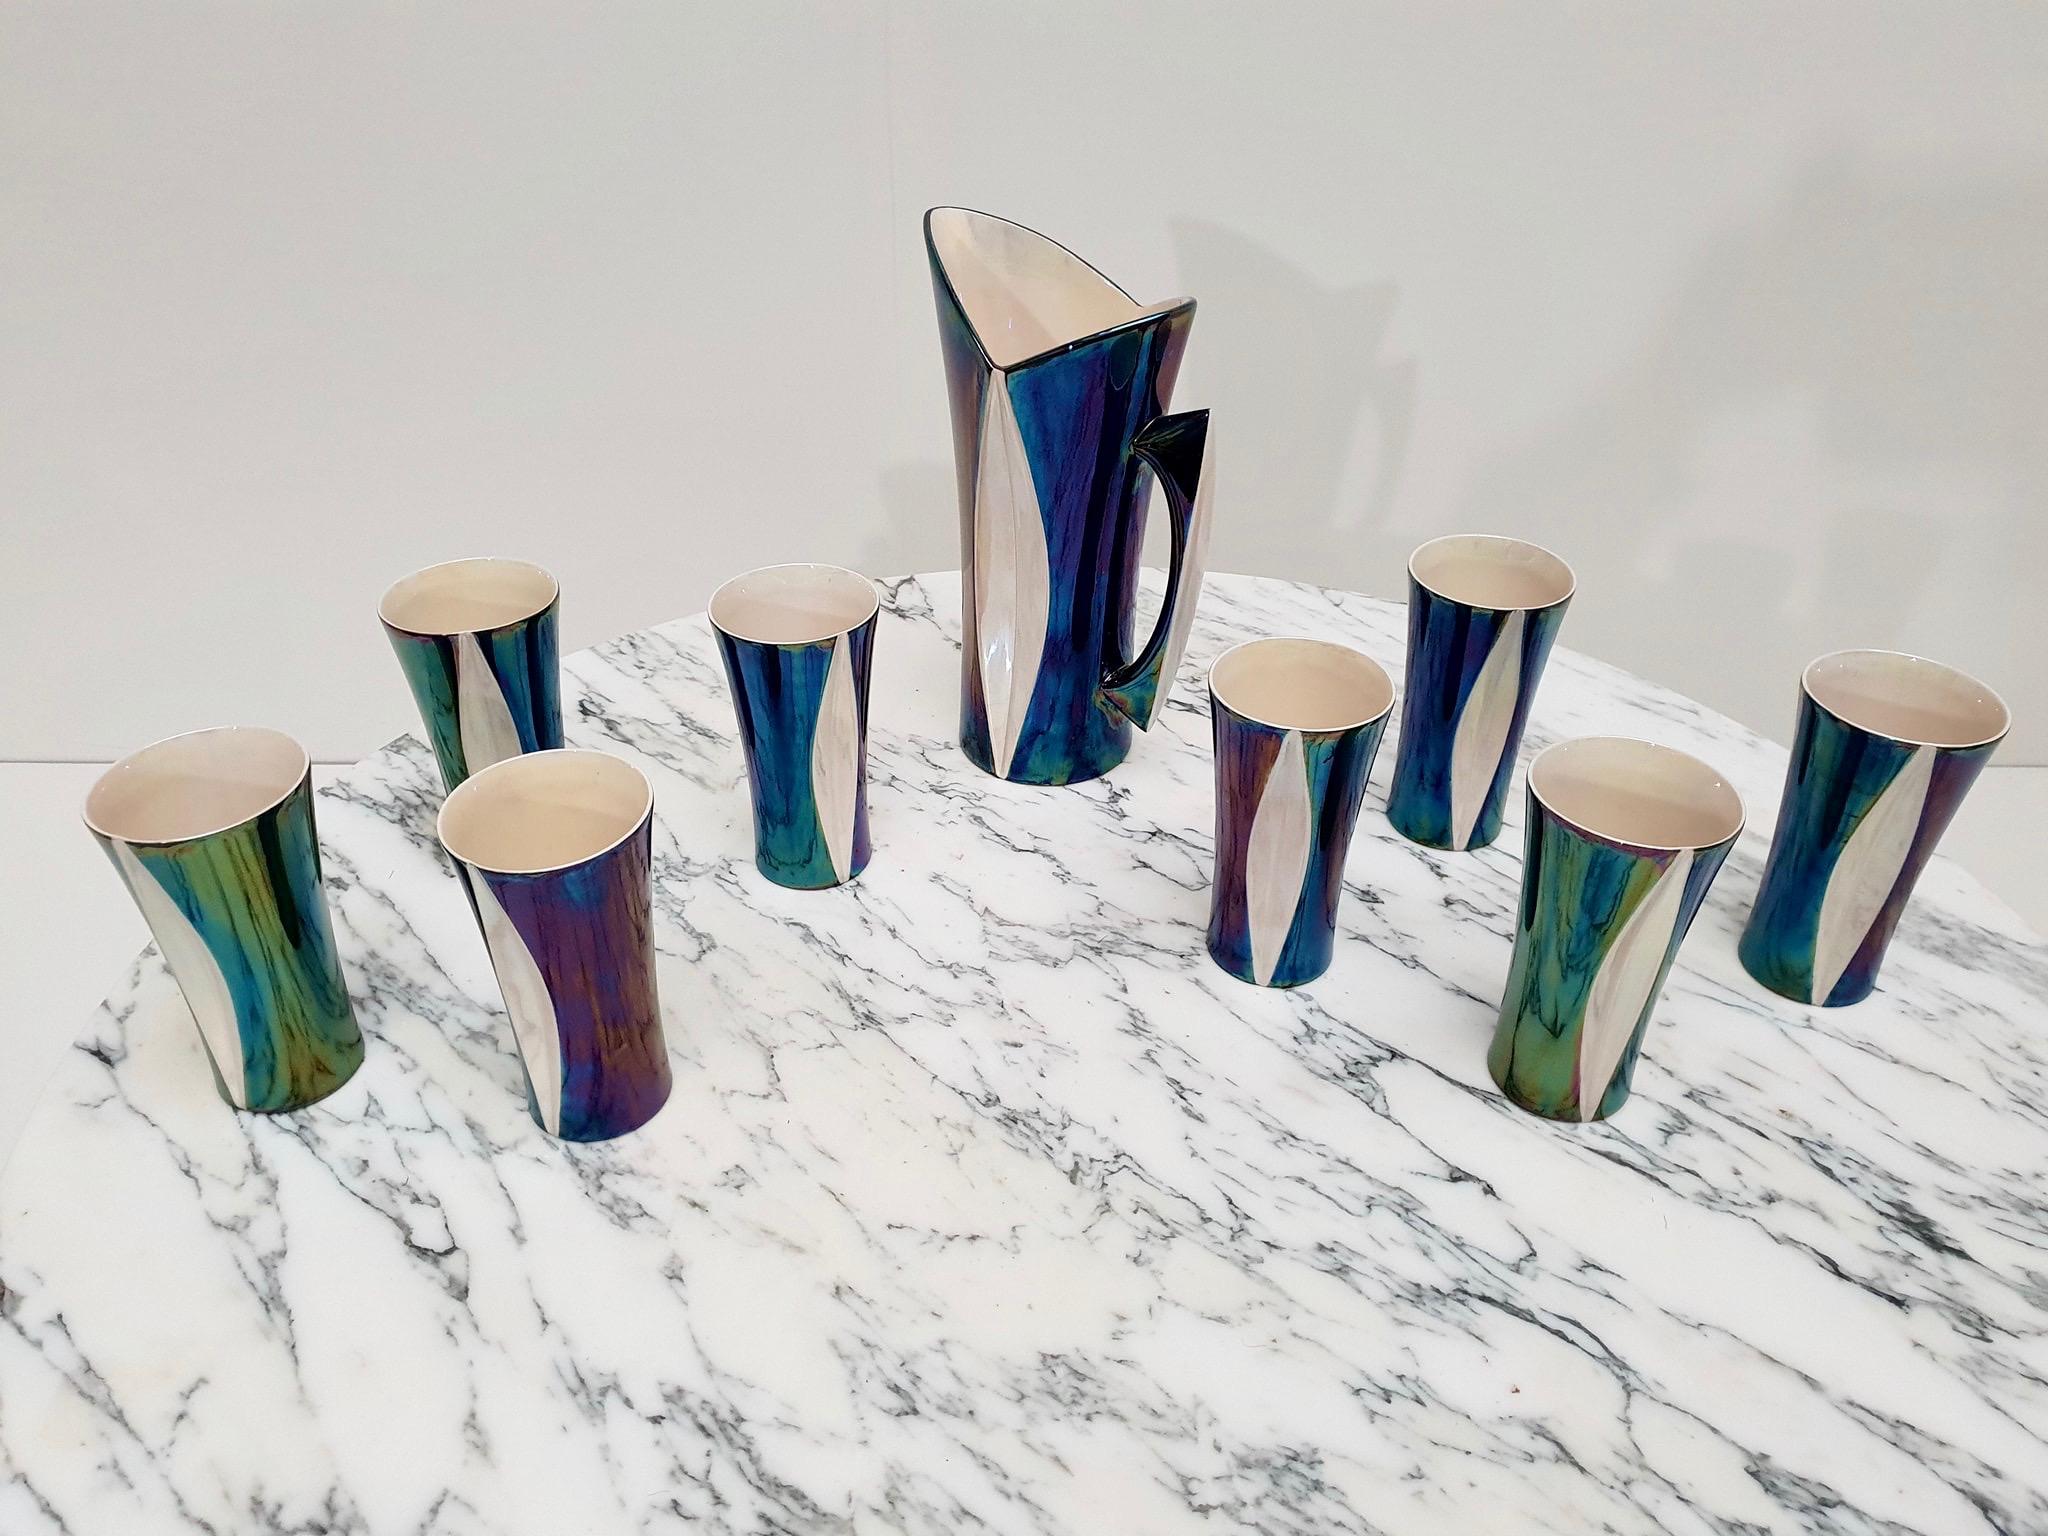 Mid-20th Century Iridescent Ceramic Drinks Set of 9 Made in France, 1970s For Sale 1